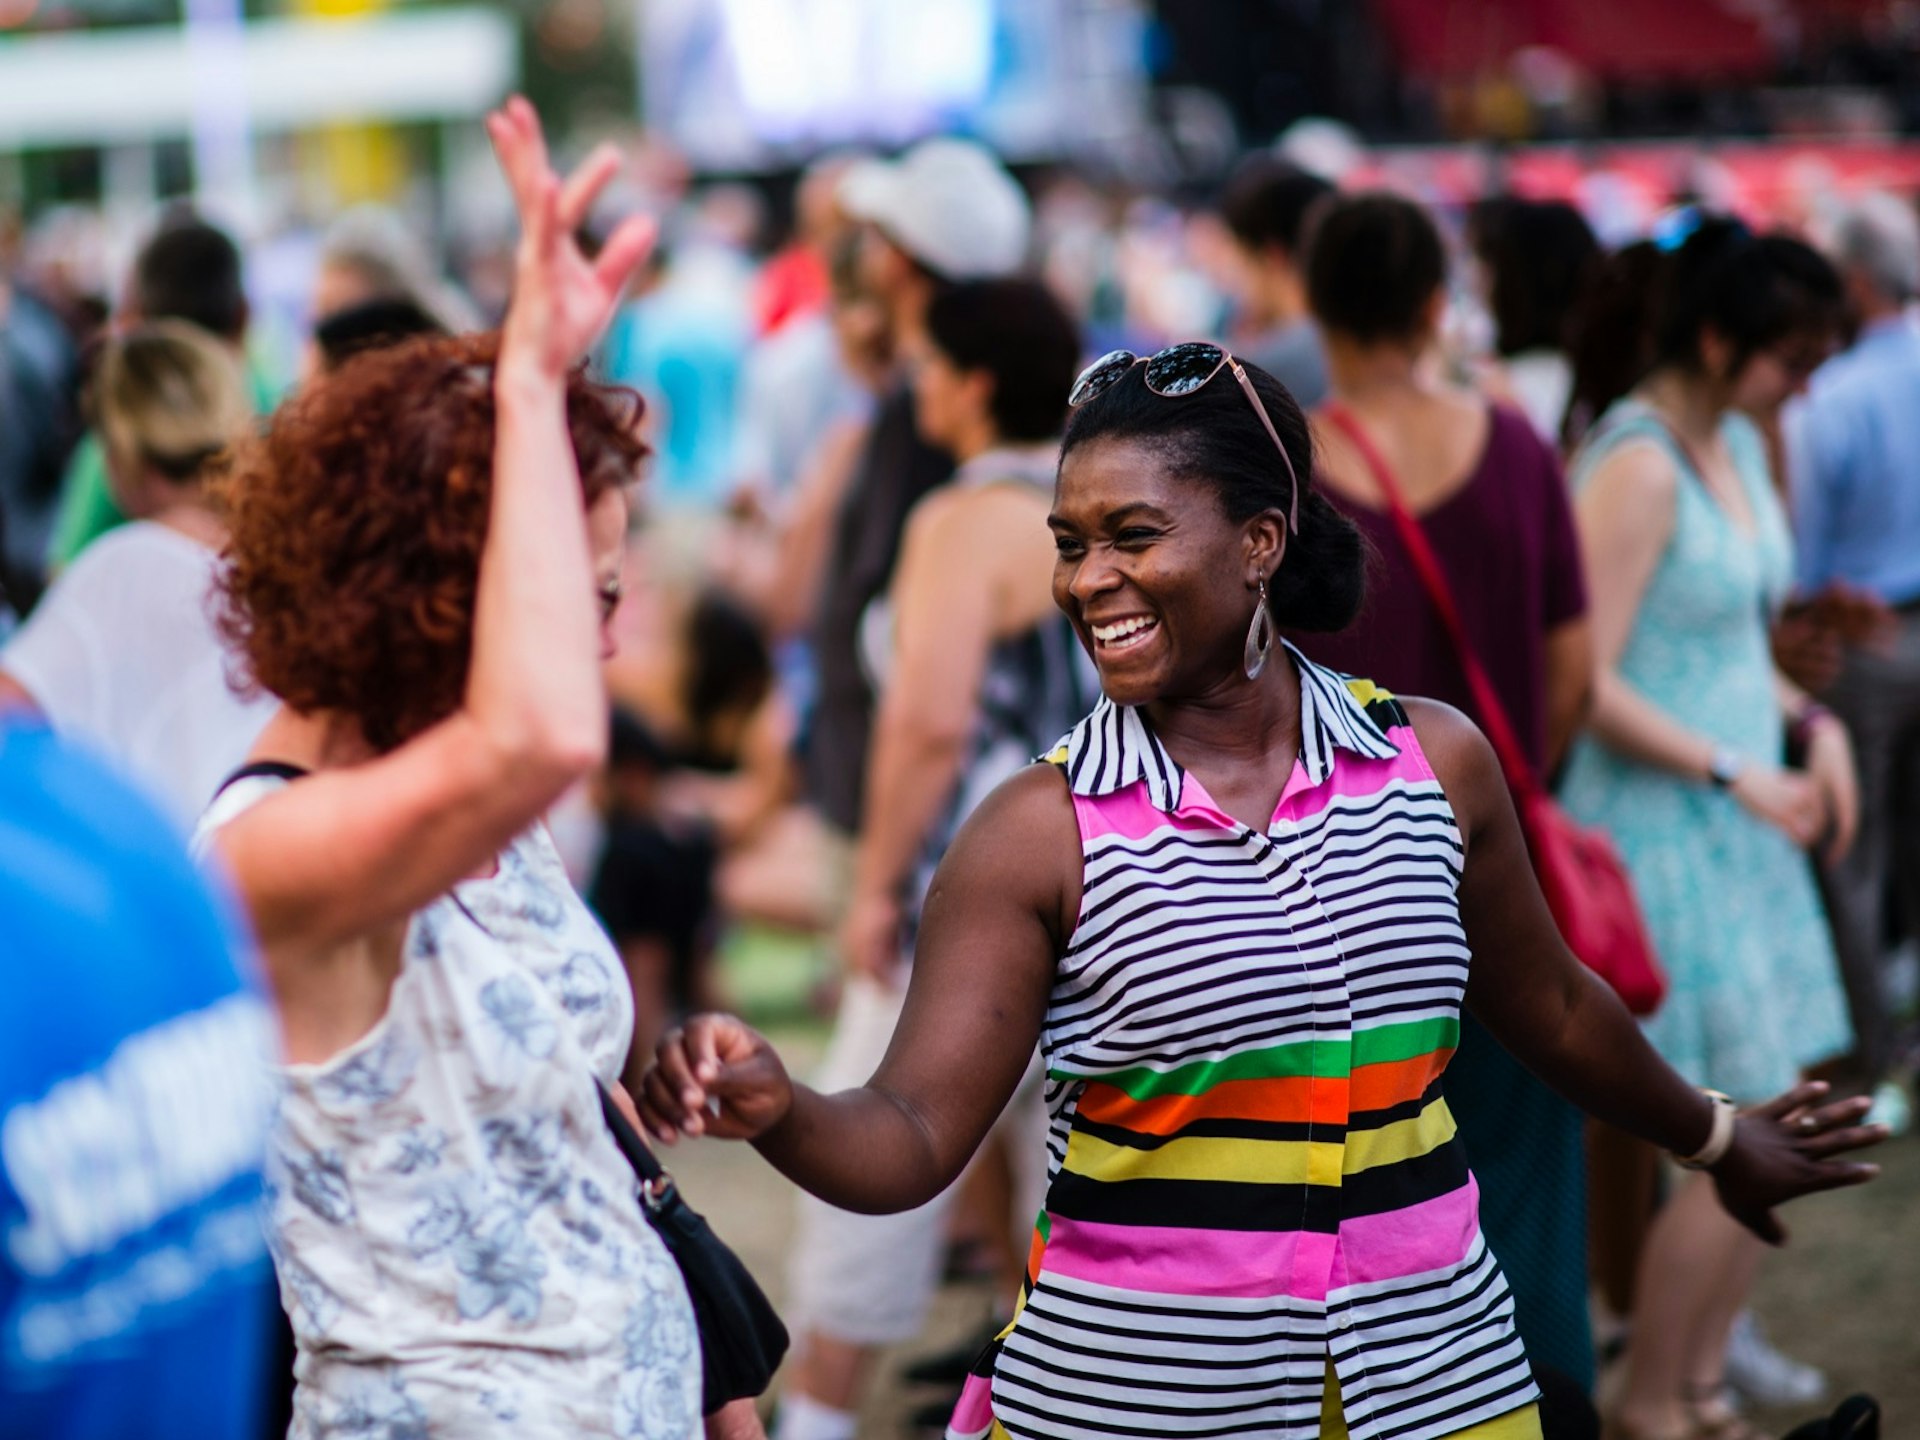 People dance and enjoy the outdoor concert at Place des Arts in Montreal; free things to do in Montréal